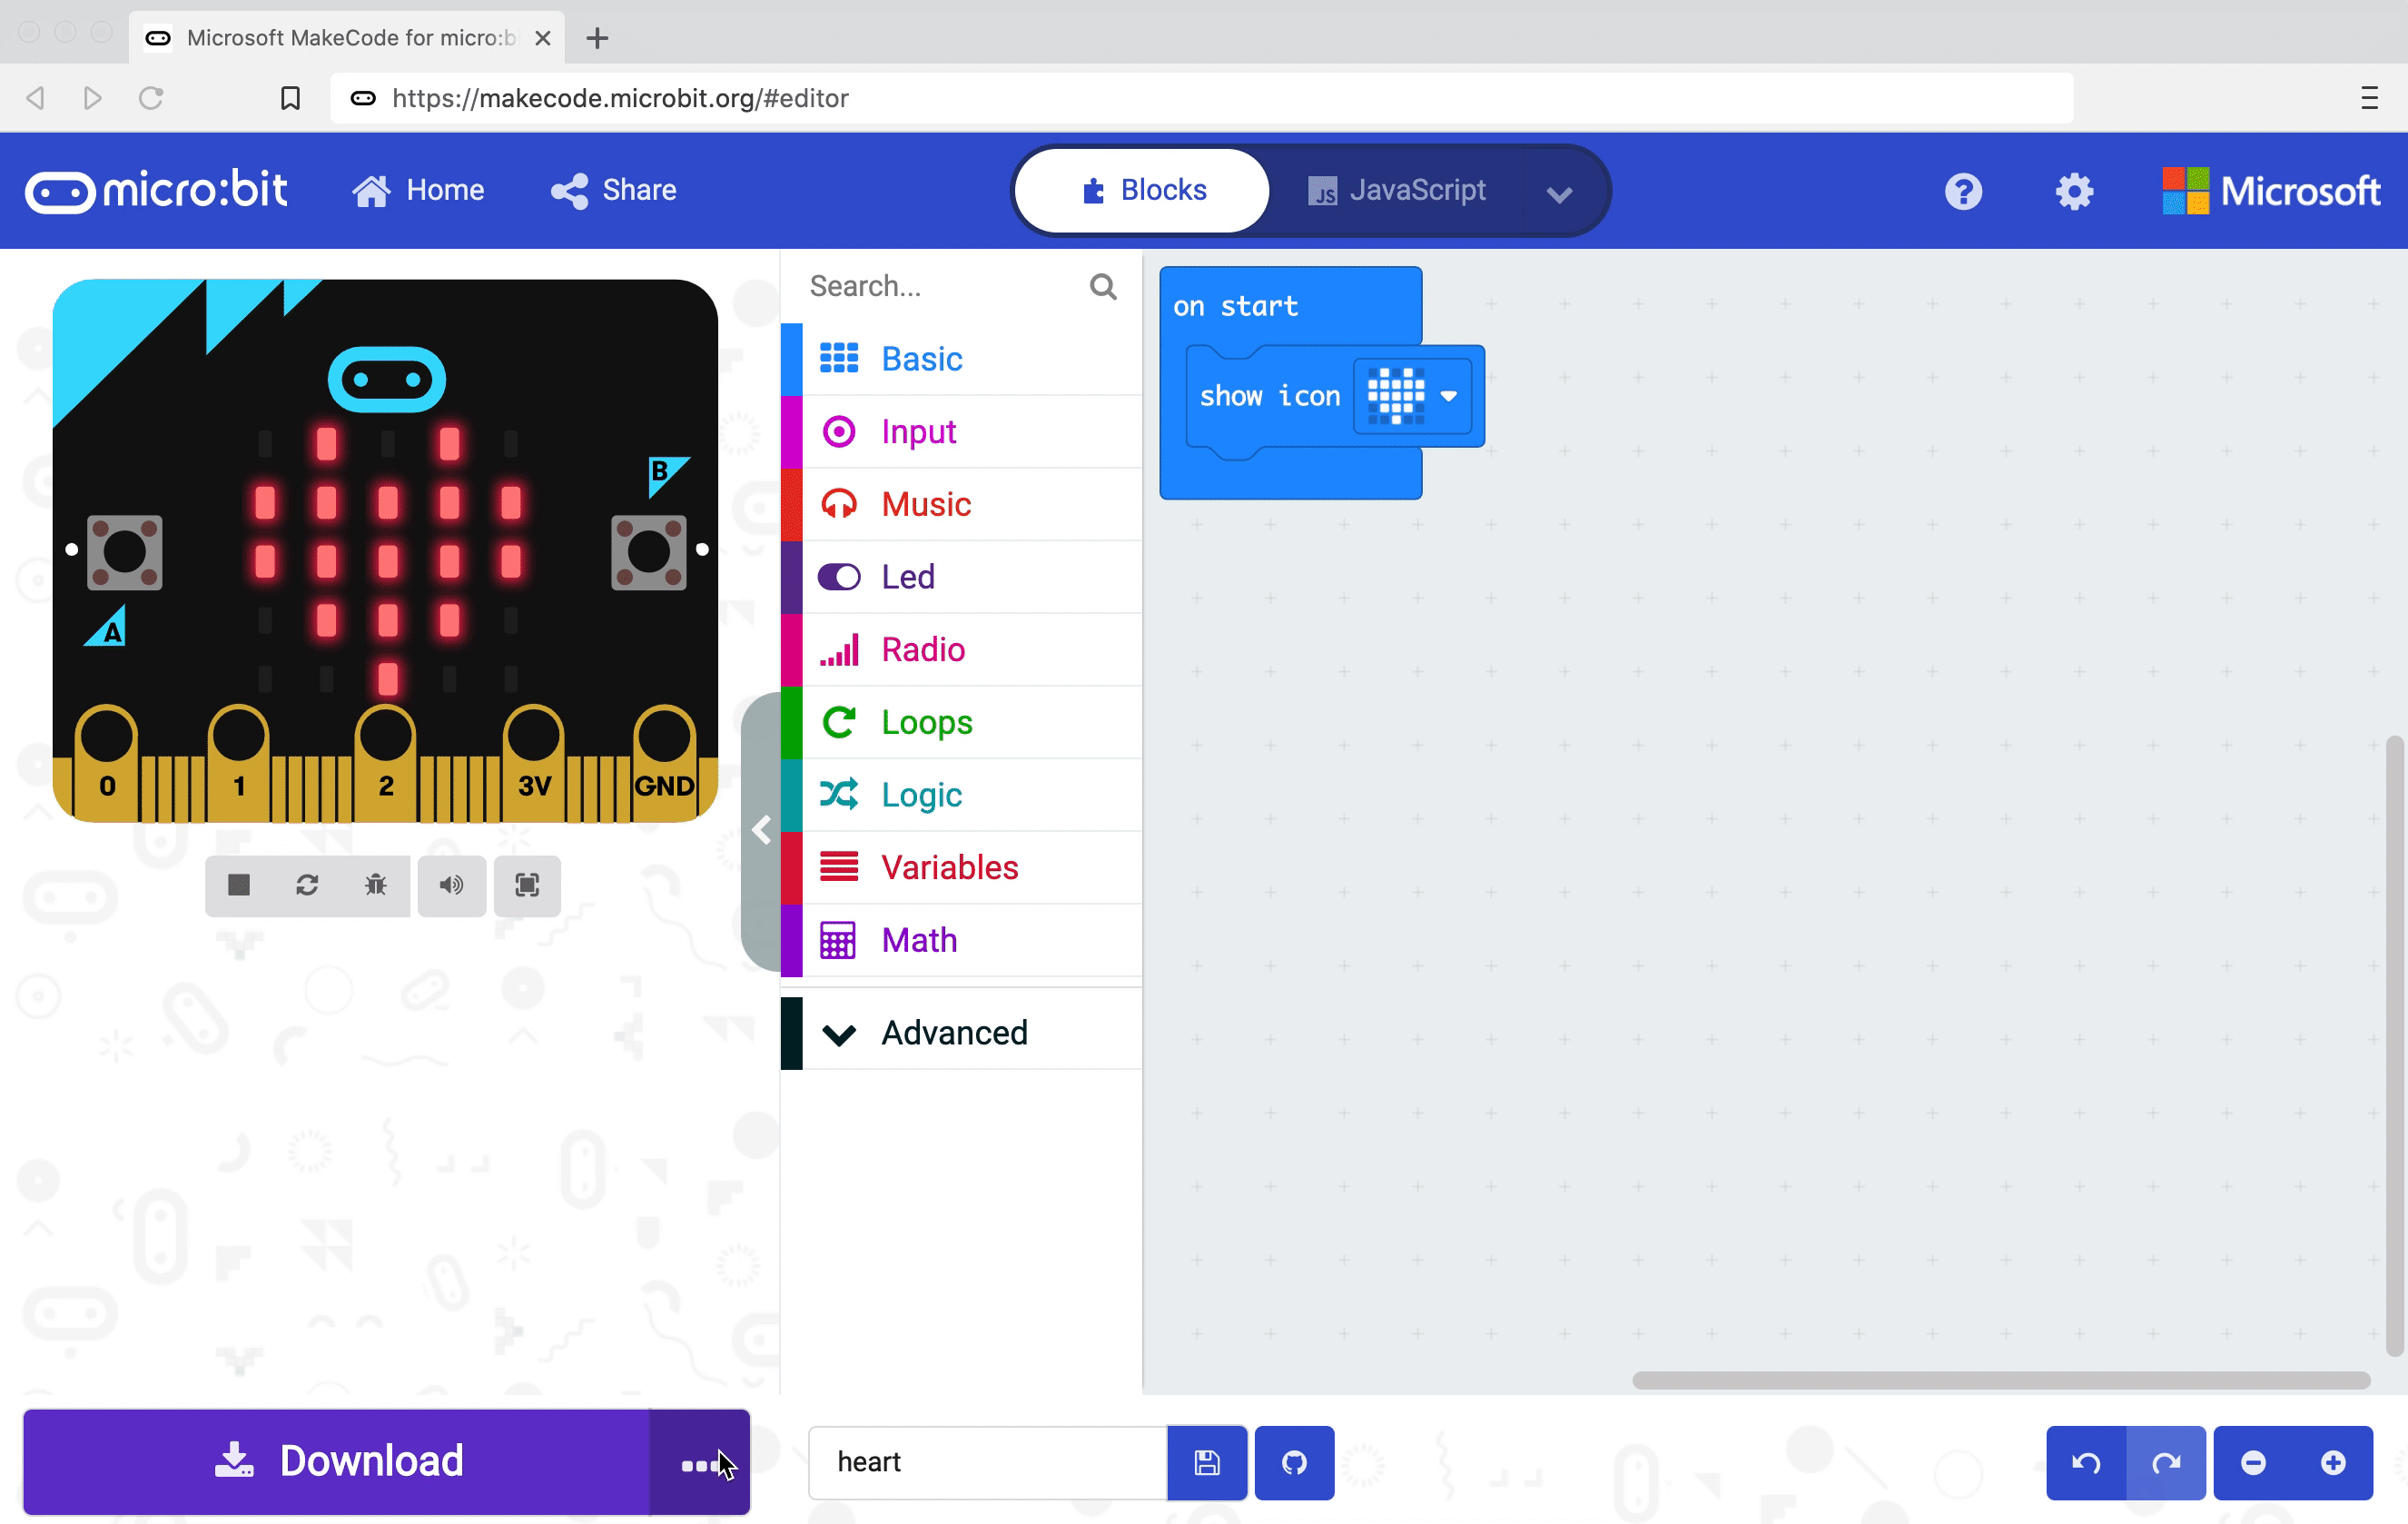 screen recording: how to connect micro:bit to MakeCode editor using webUSB